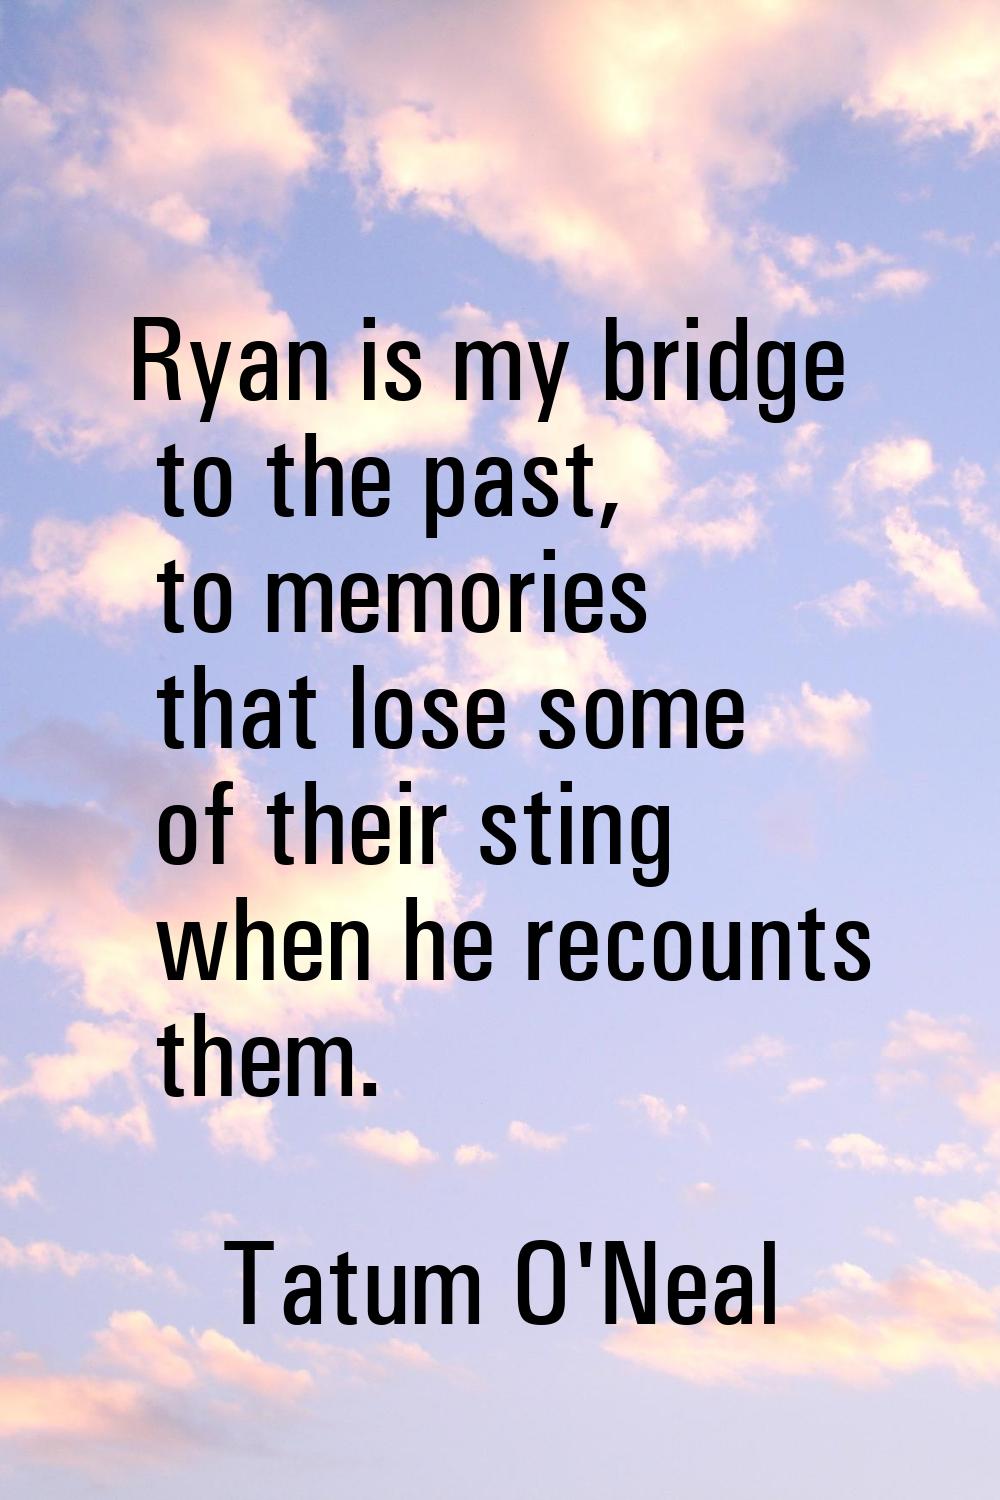 Ryan is my bridge to the past, to memories that lose some of their sting when he recounts them.